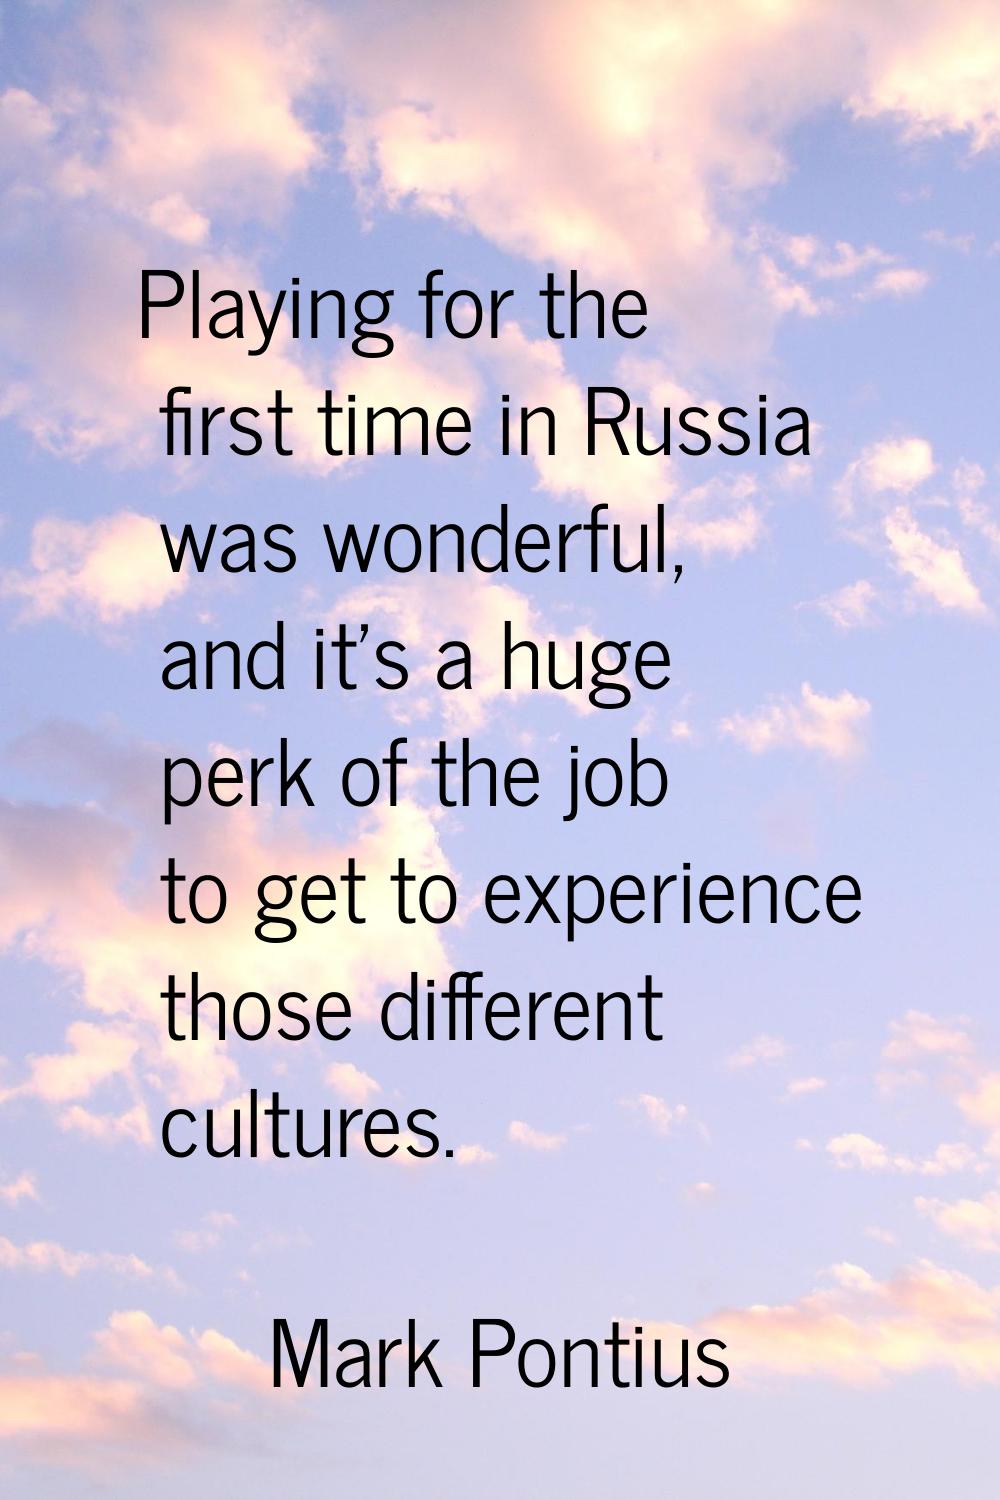 Playing for the first time in Russia was wonderful, and it's a huge perk of the job to get to exper